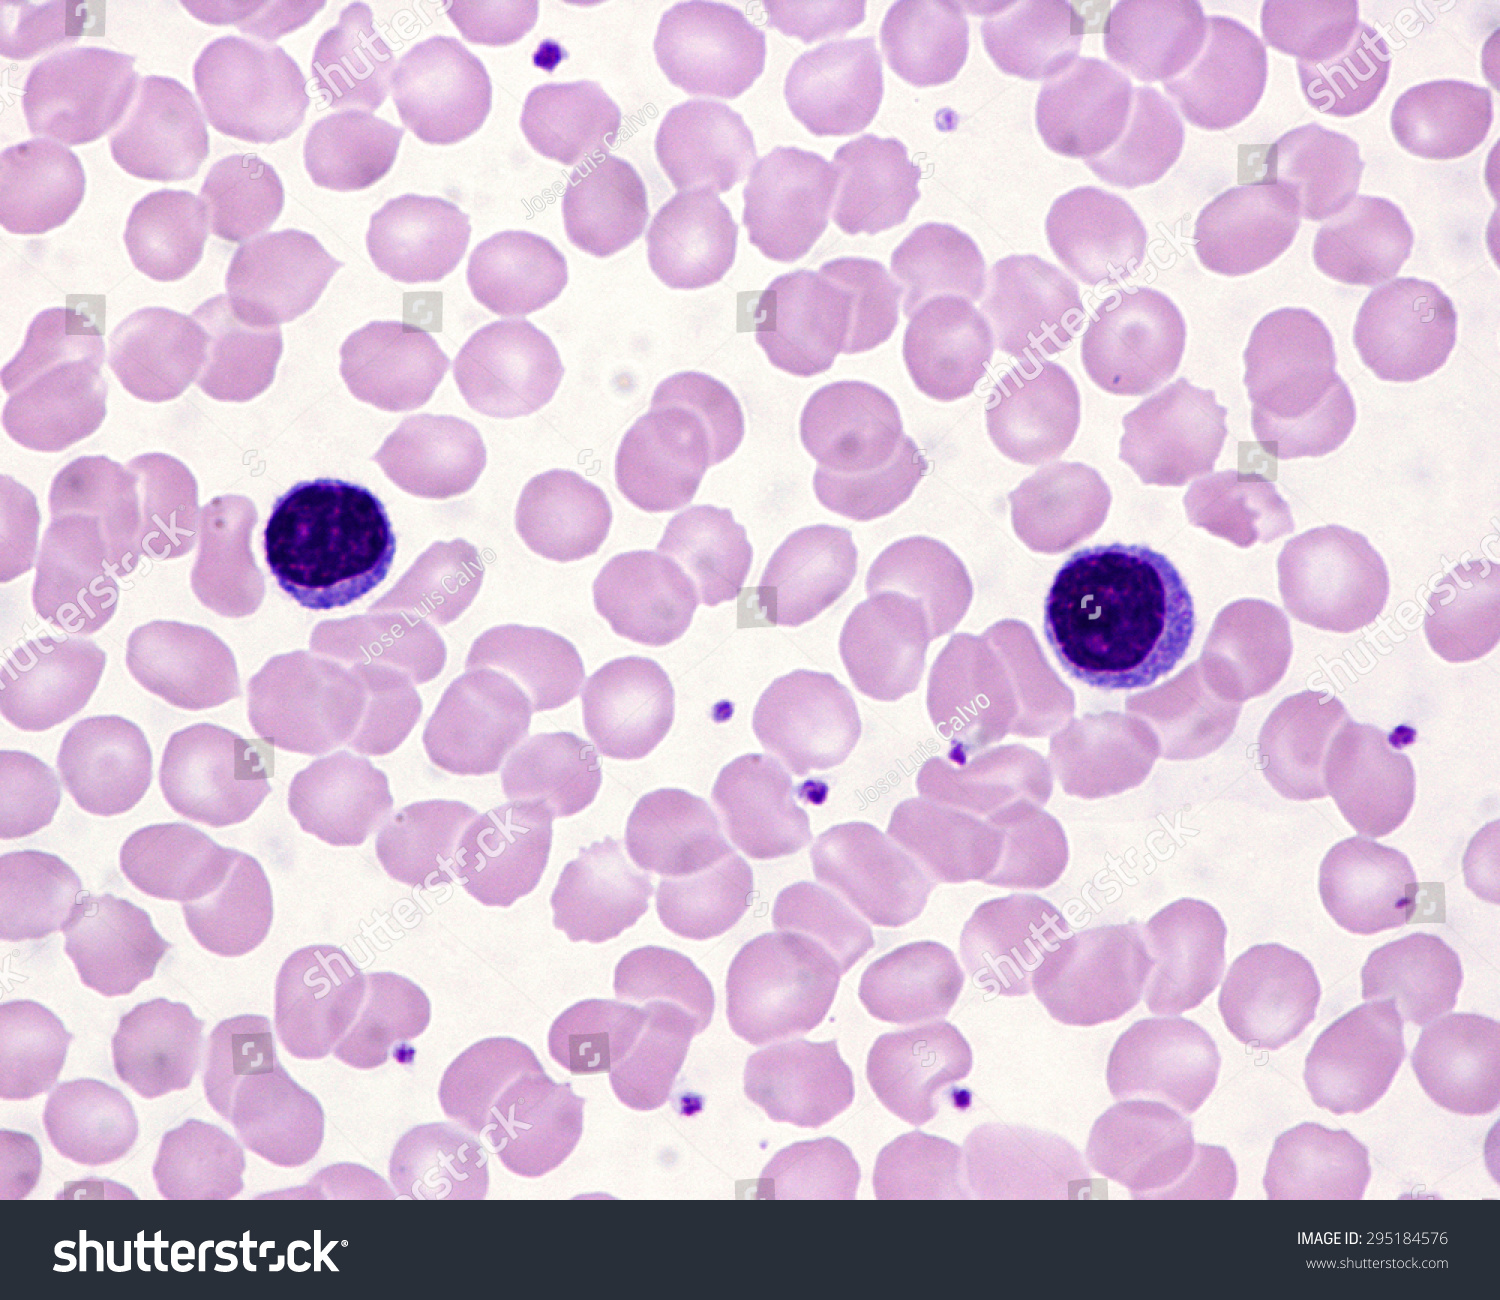 Blood Smear Showing Two Lymphocytes Small Stock Photo 295184576 ...